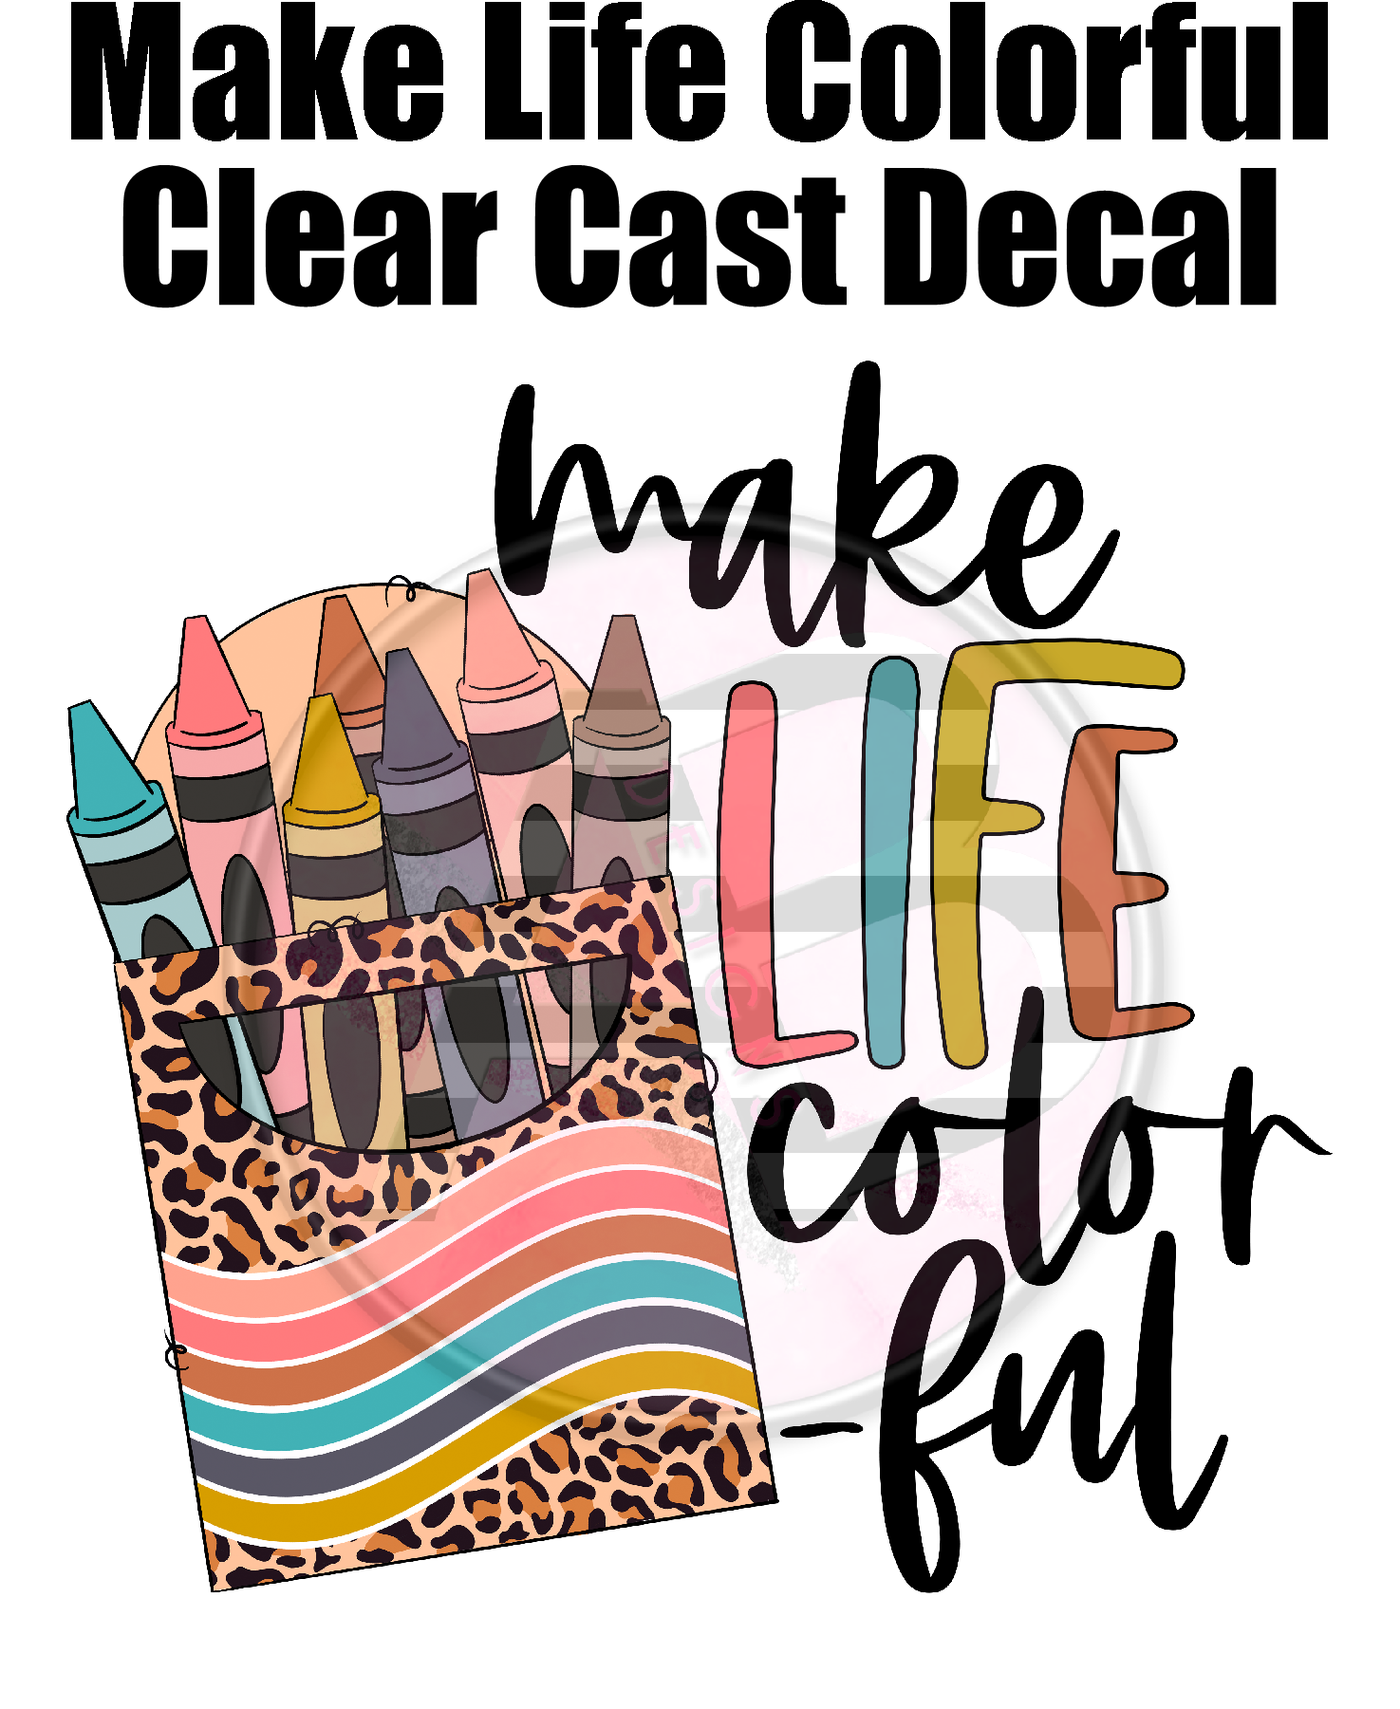 Make Life Colorful - Clear Cast Decal-523